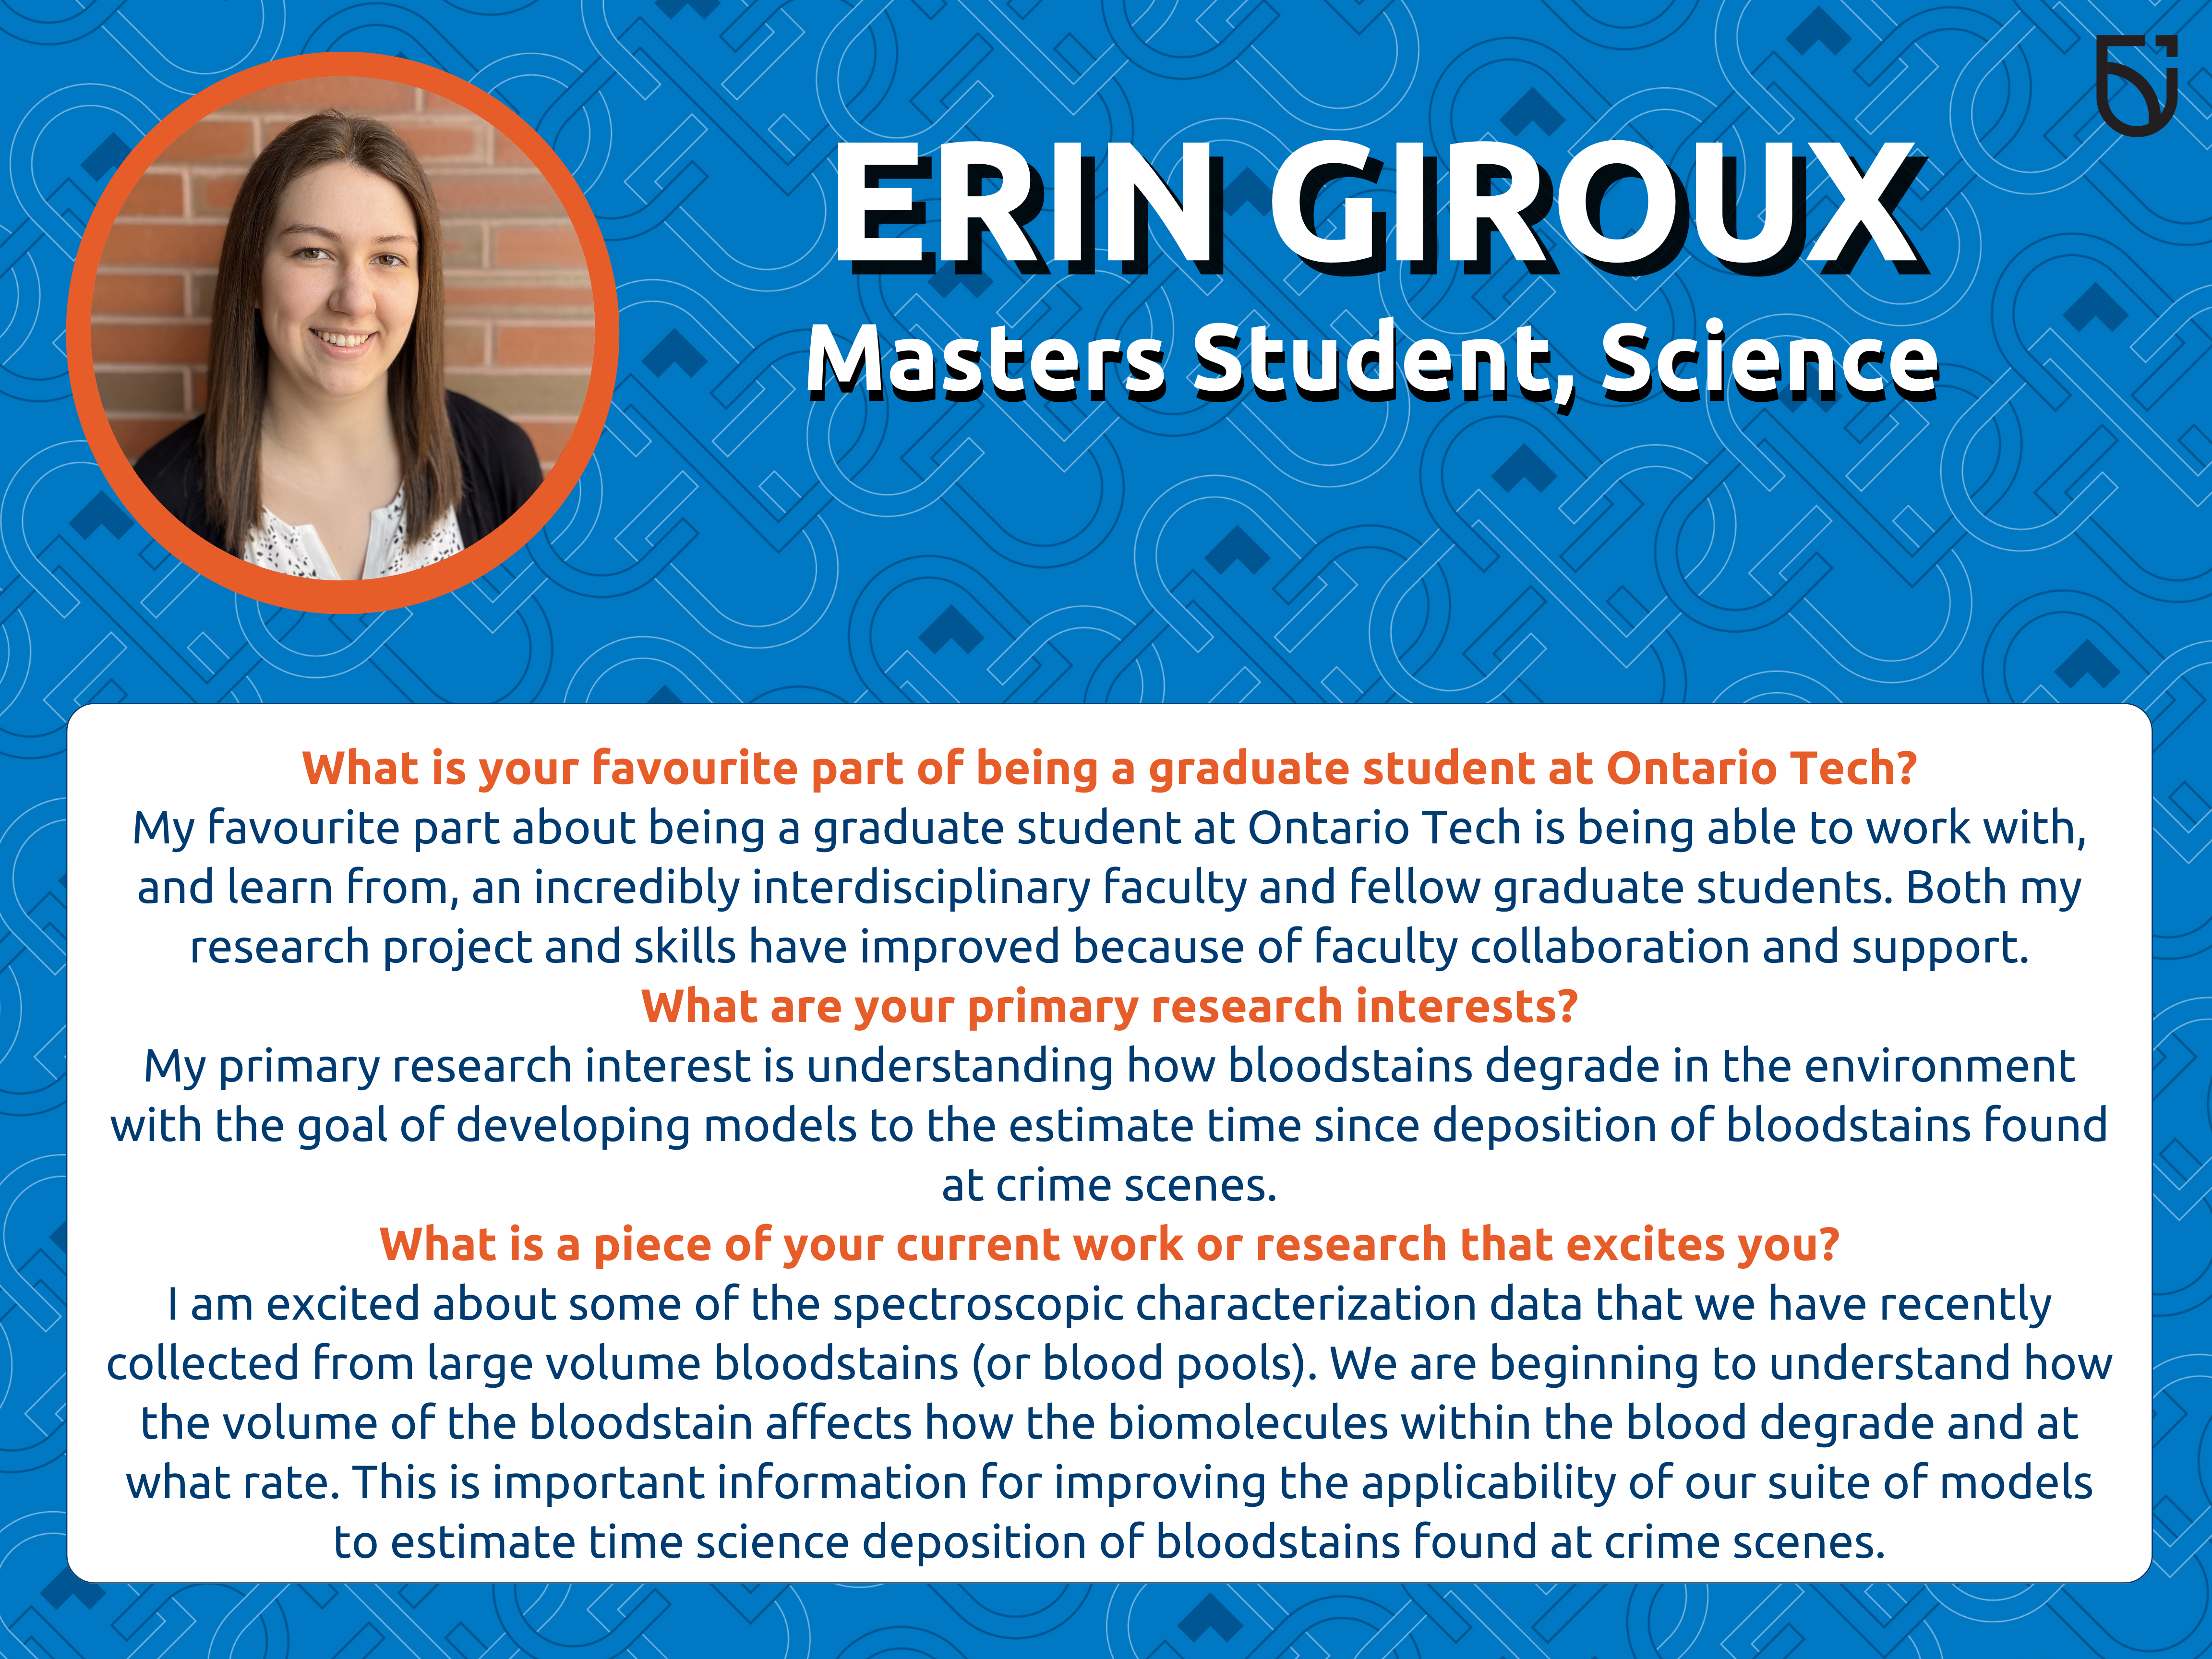 This photo is a Women’s Wednesday feature of Erin Giroux, a Masters Student in the Faculty of Science.